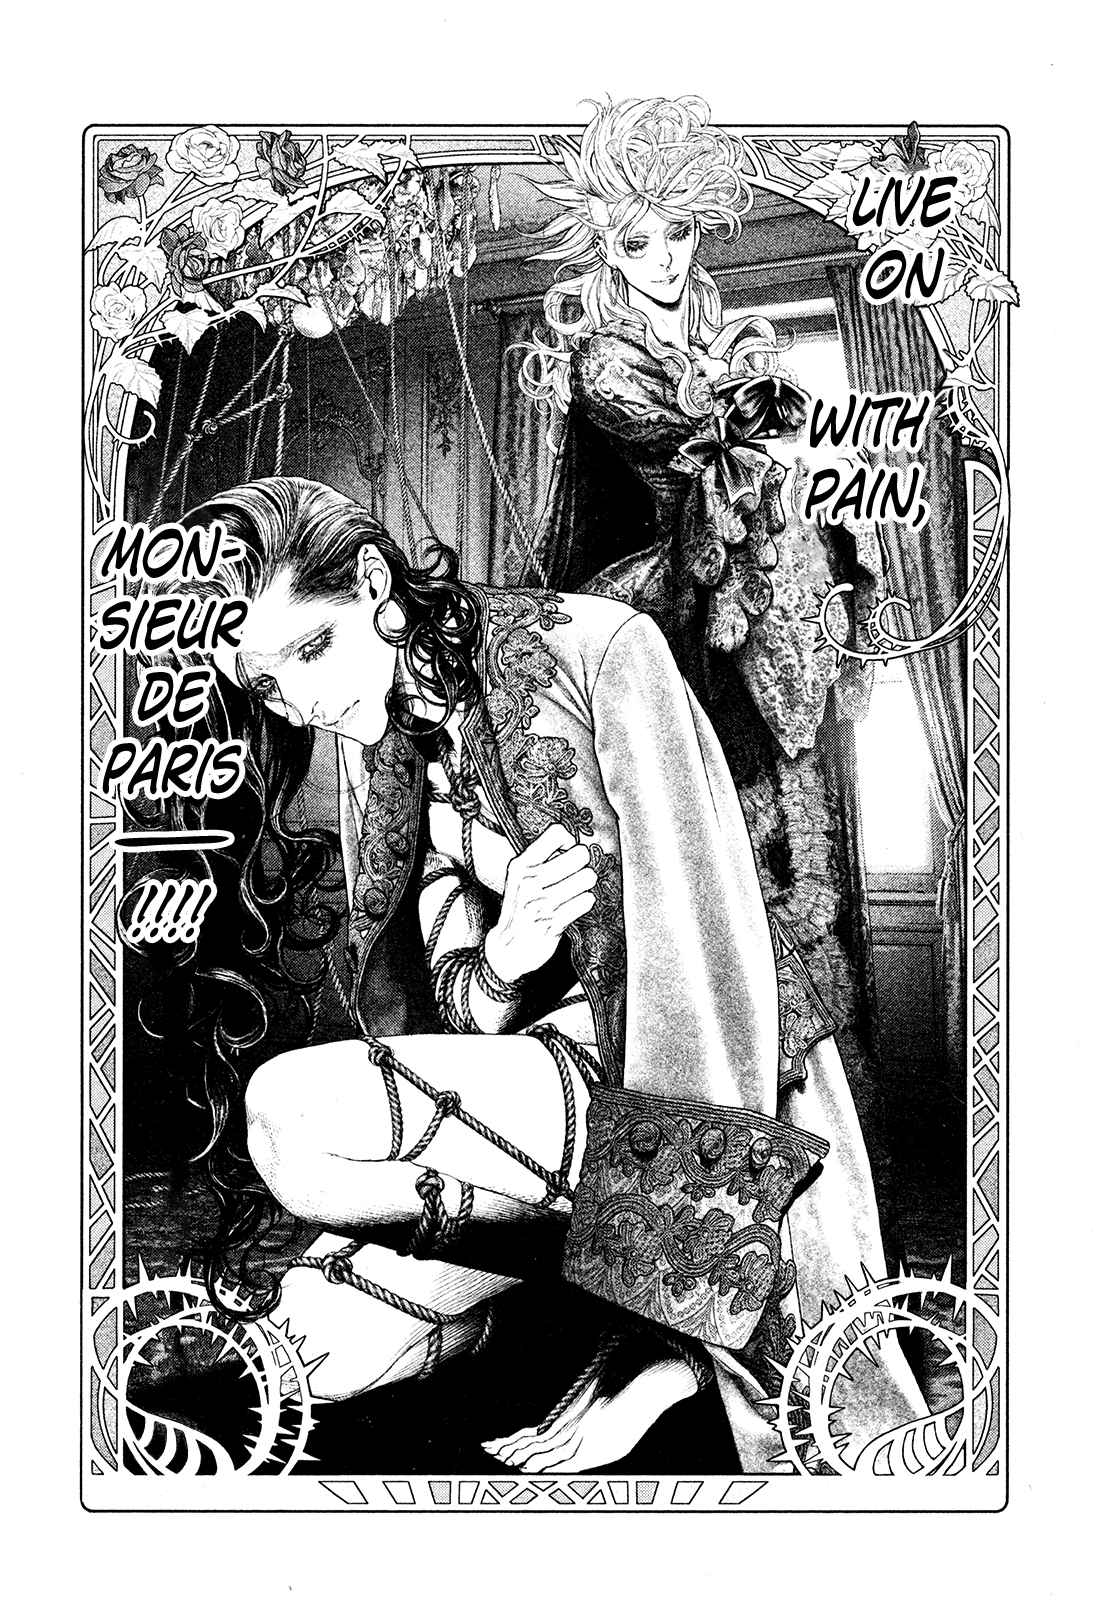 Innocent Rouge Vol. 9 Ch. 60 The Morning of Louis Capet's Execution (3)